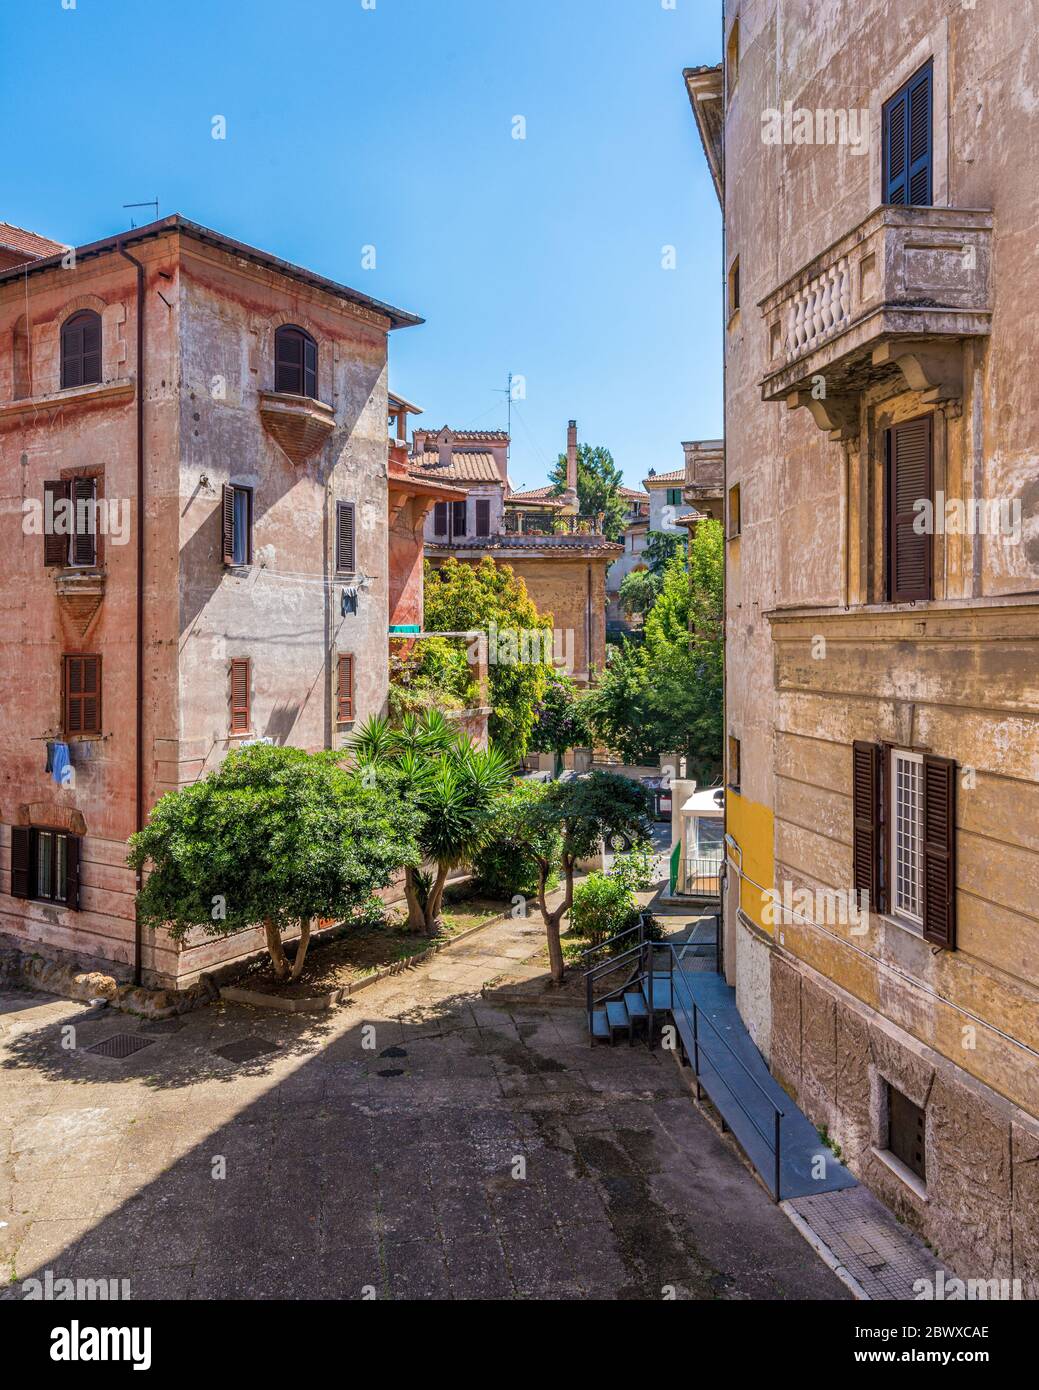 The picturesque Garbatella neighborhood in Rome on a sunny morning, Italy. Stock Photo